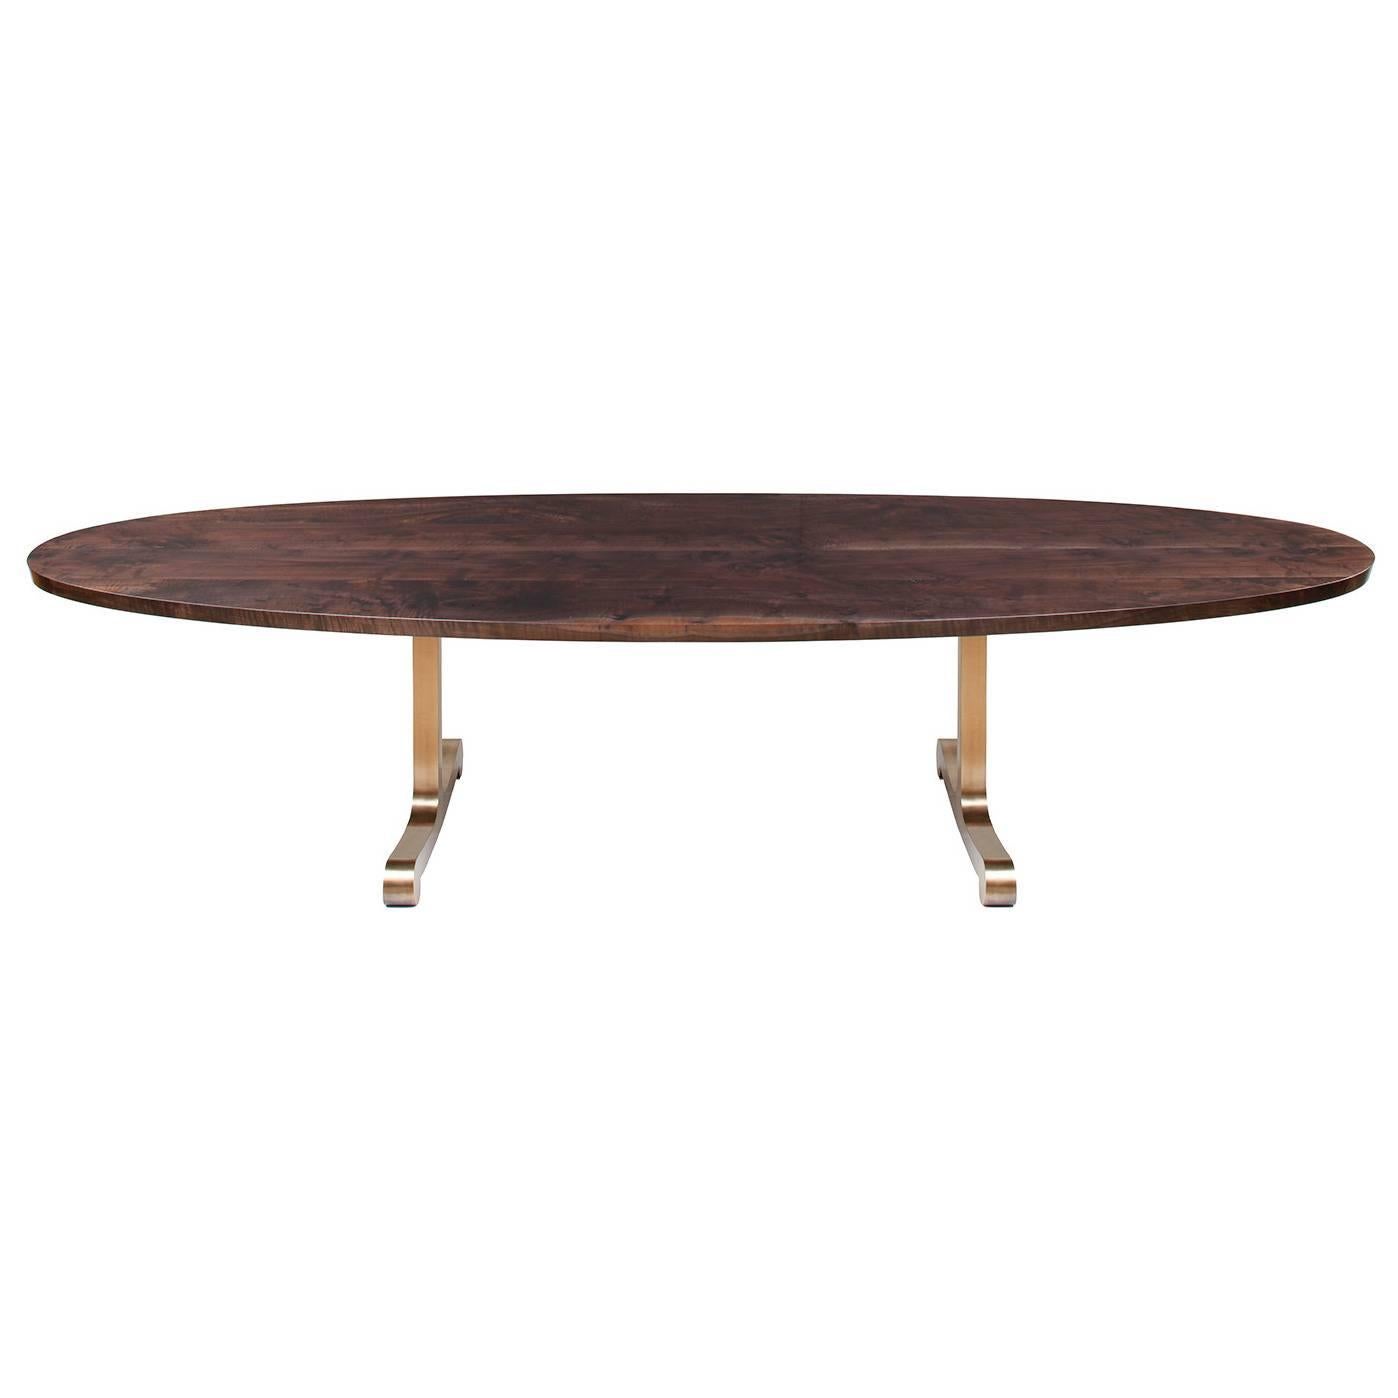 "Vienna" Oval Dining Table in Smoked Walnut and Cast Bronze by Studio Roeper